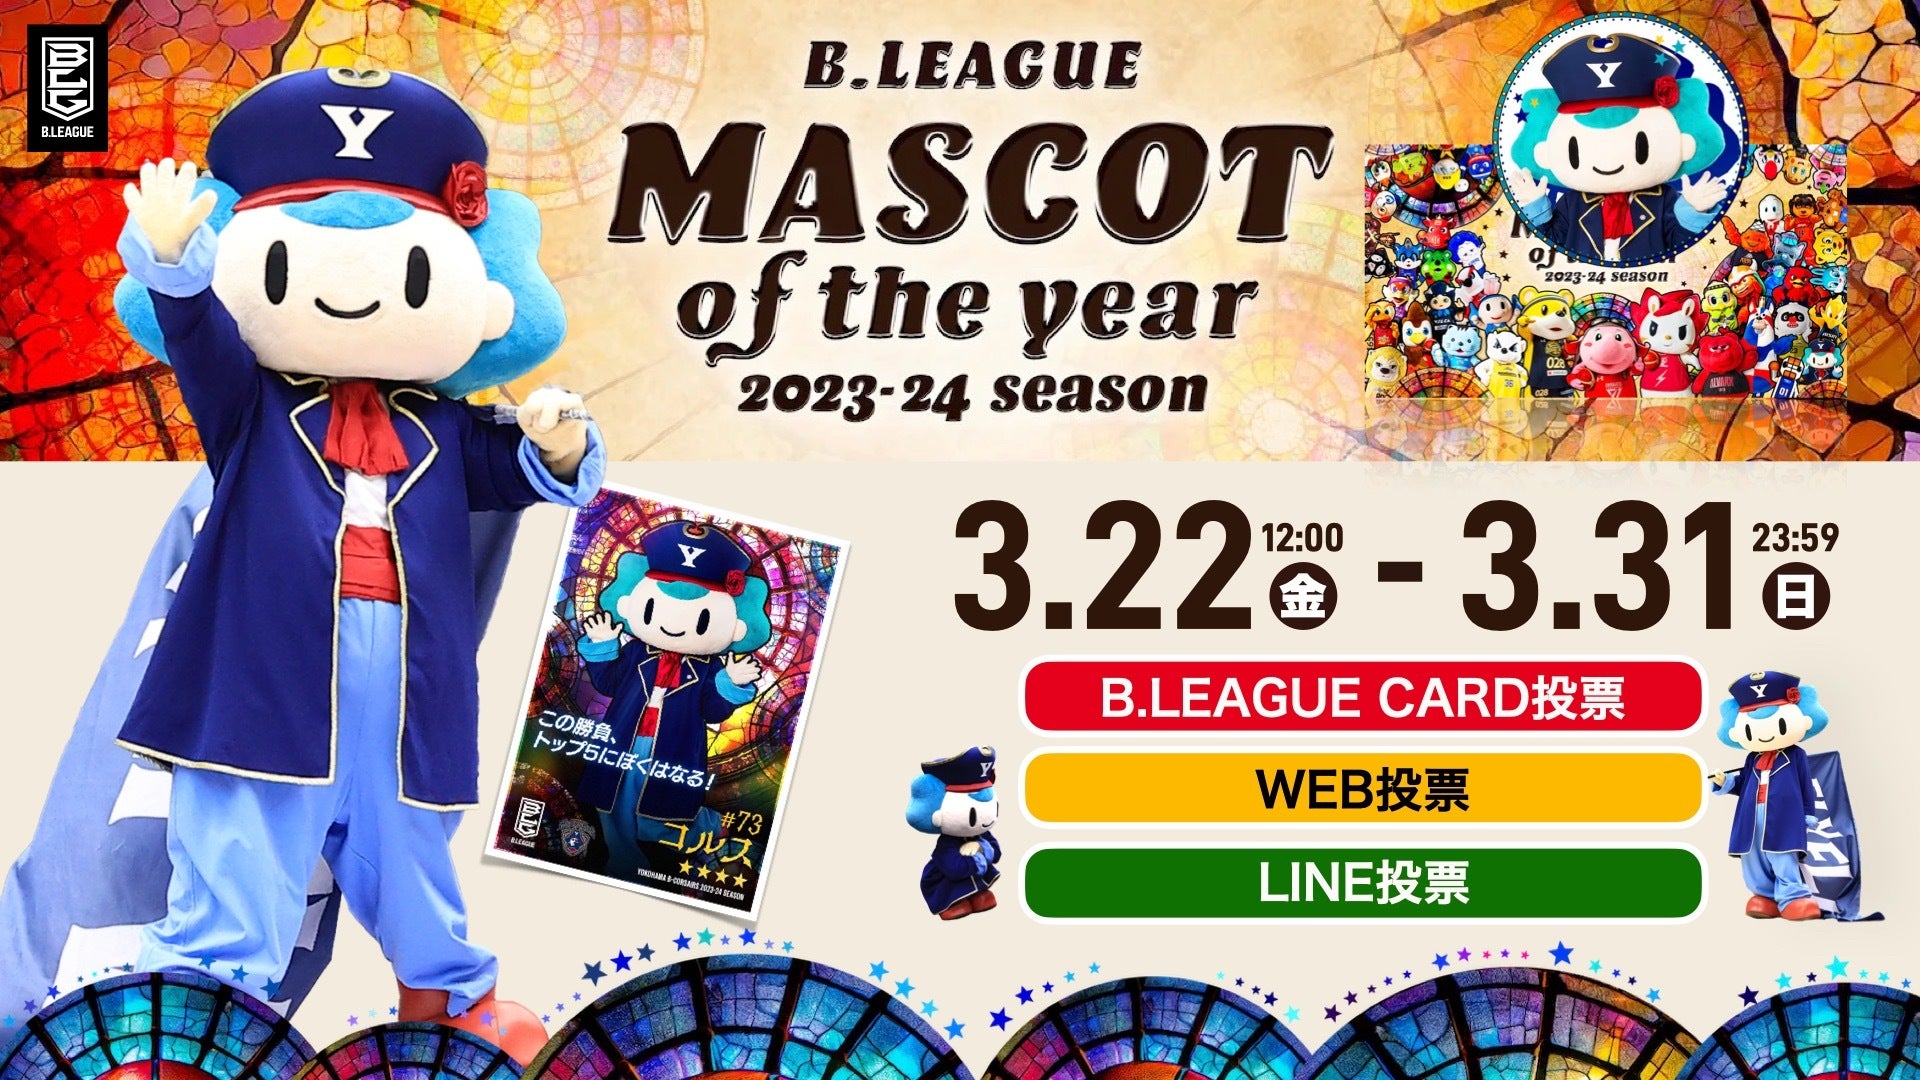 B.LEAGUE MASCOT OF THE YEAR 2023-24